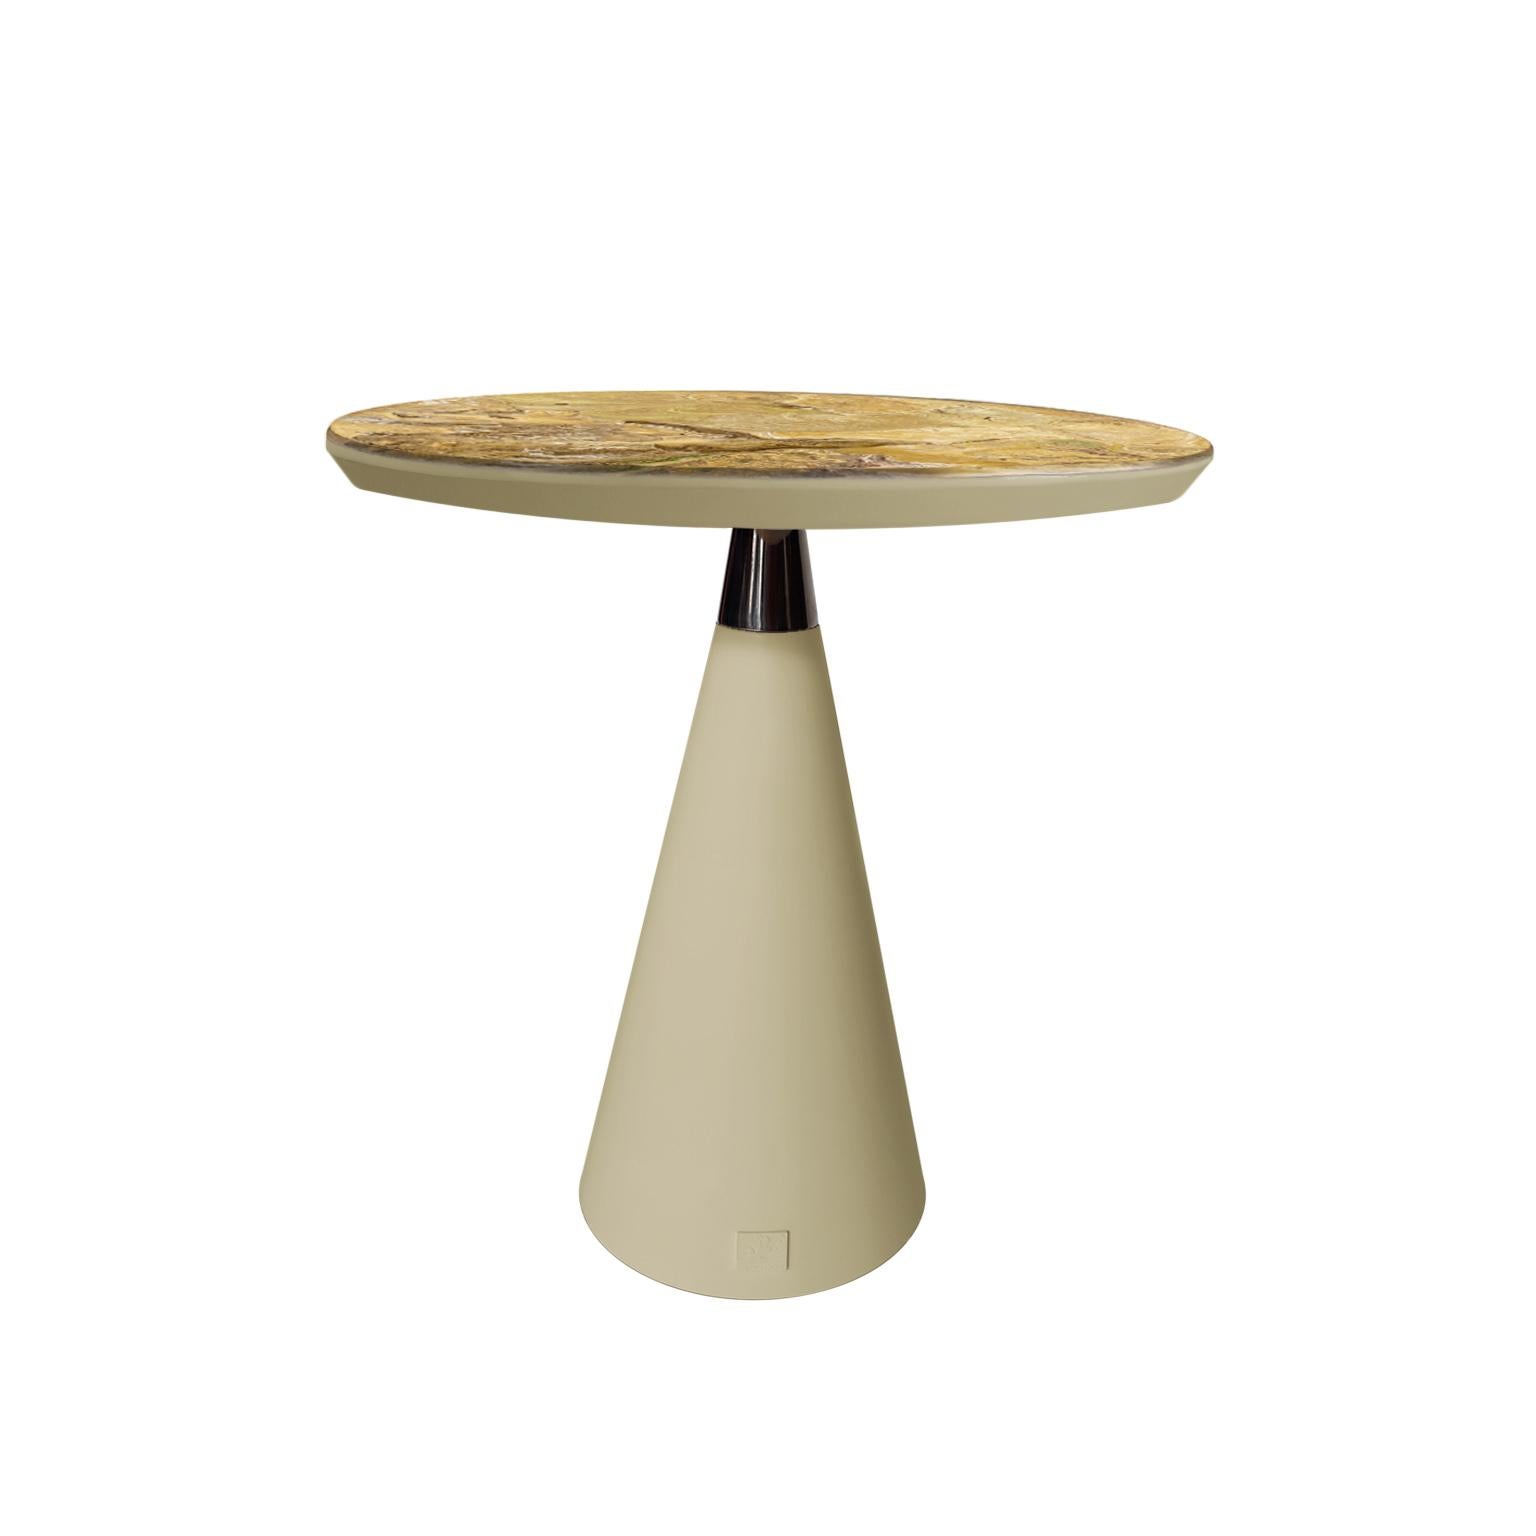 Italian Round side table wooden base scagliola art top handmade in Italy by Cupioli For Sale